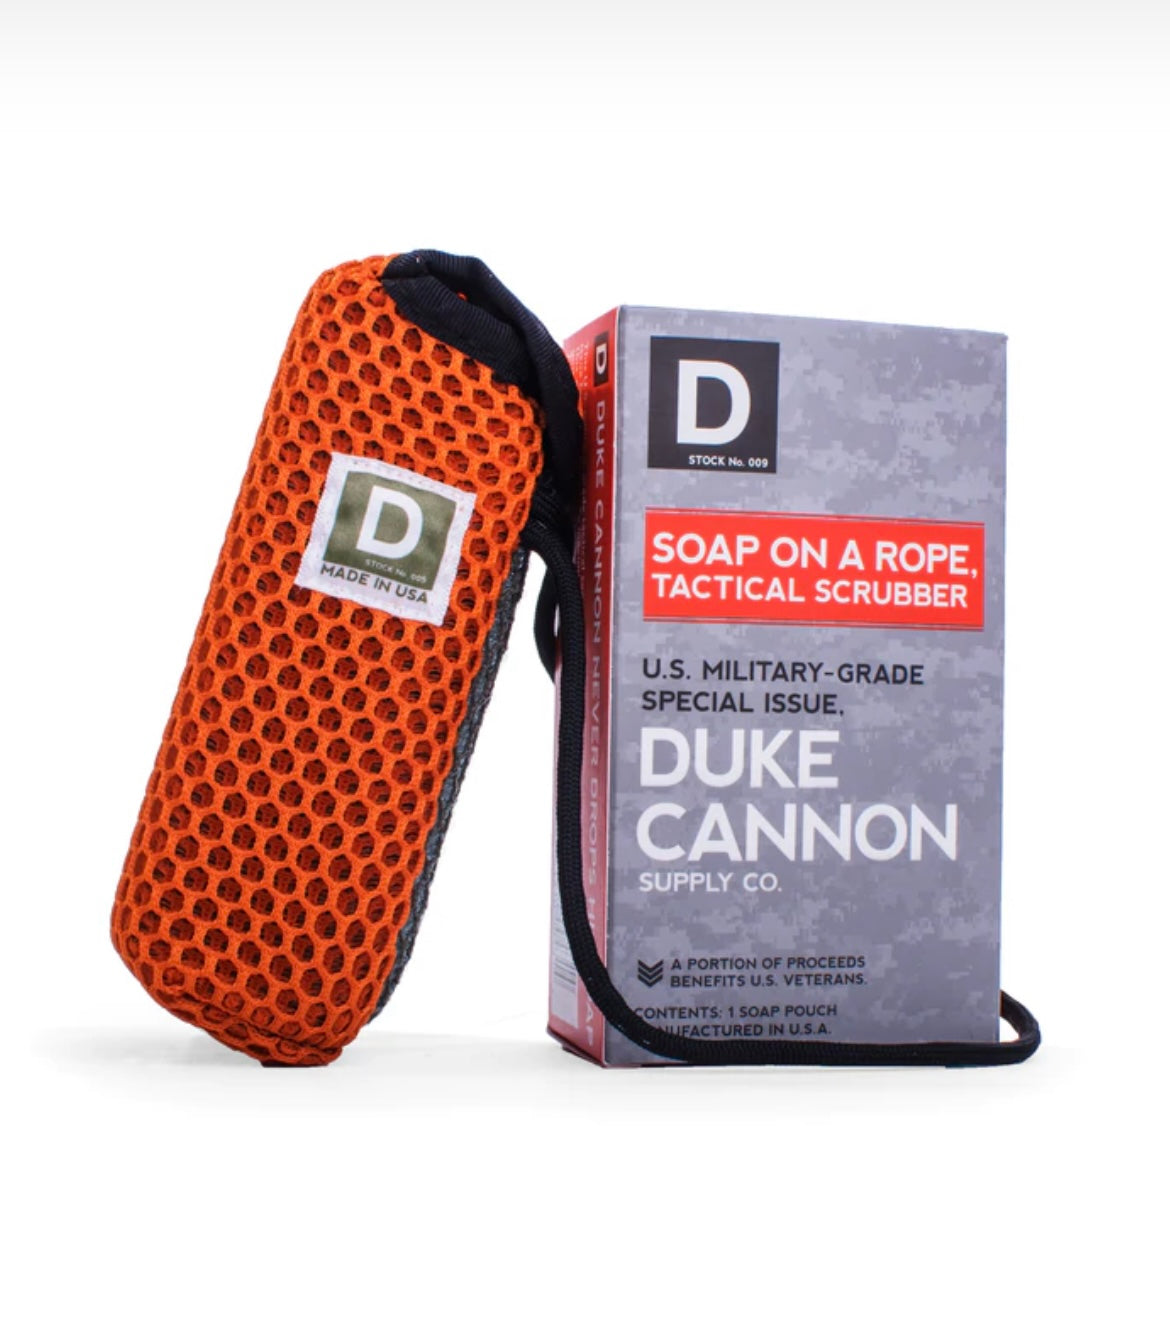 Soap on a rope tactical scrubber from Duke Cannon